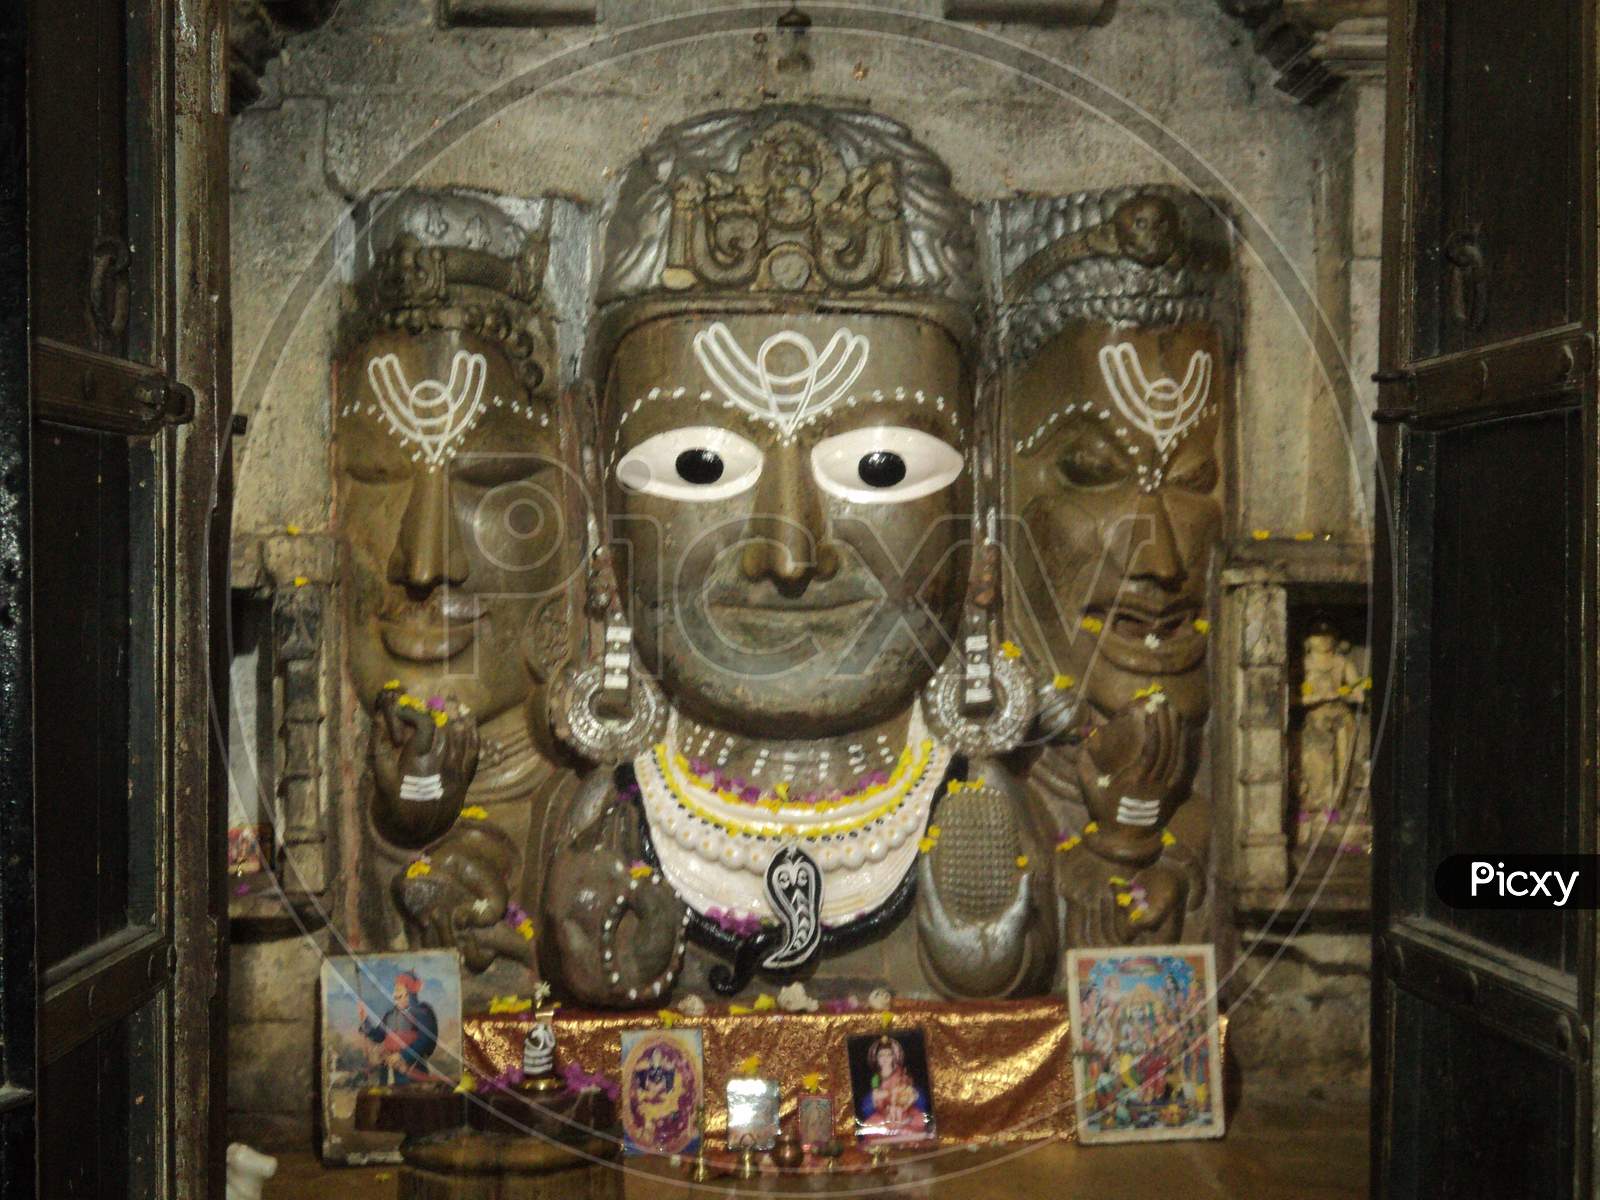 A picture of a deity placed in one of the temples of Chittorgarh fort, Rajasthan.